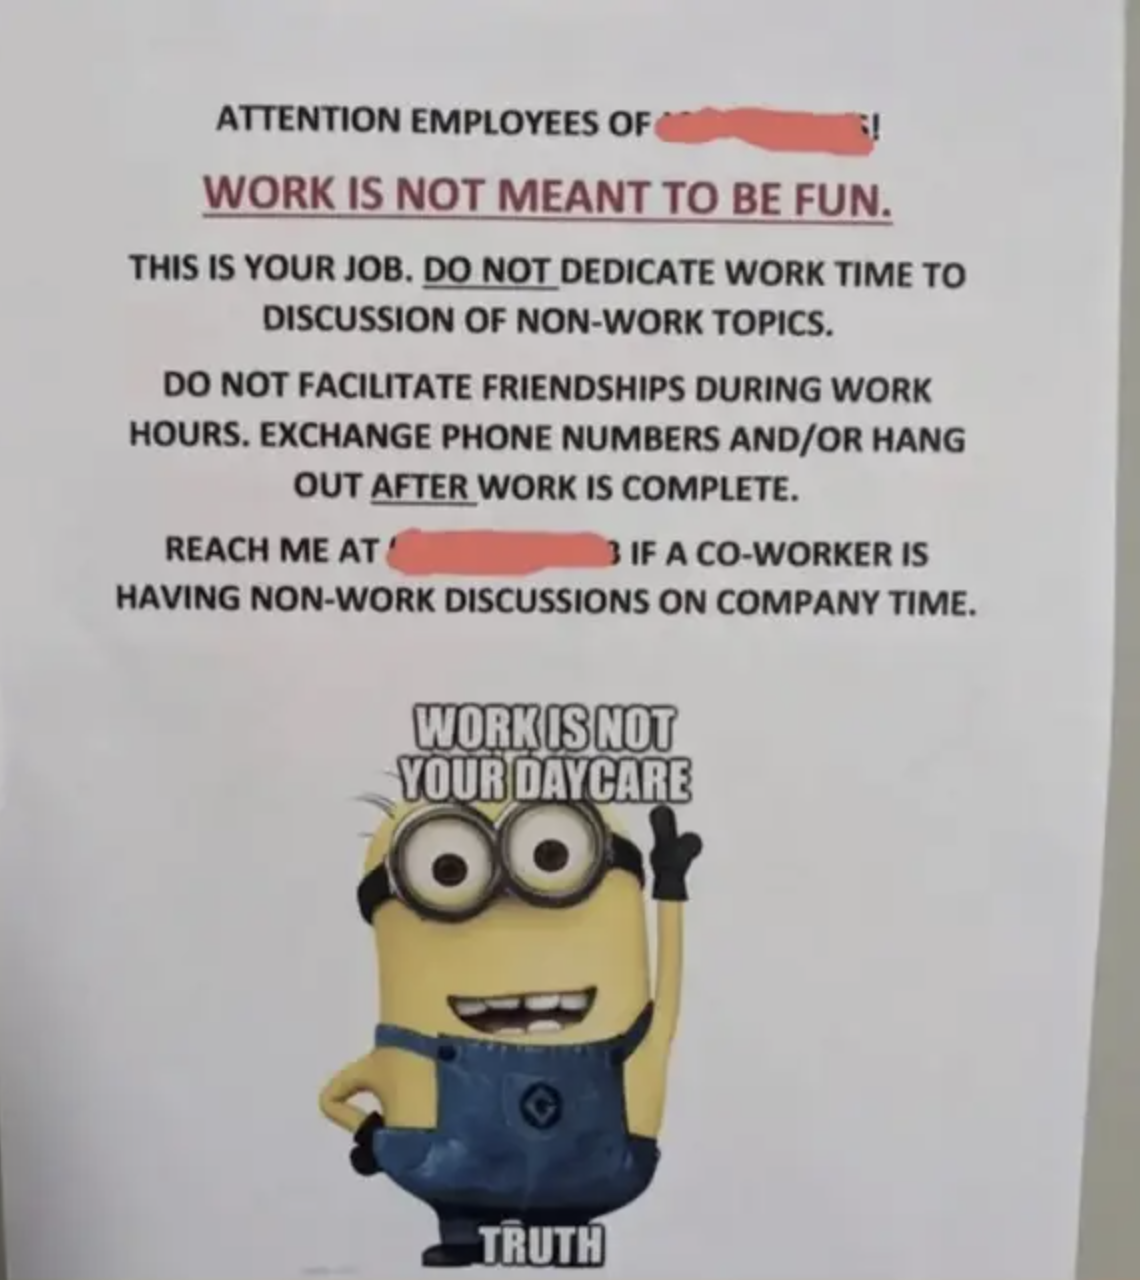 Office poster with text about not doing non-work tasks during work time, featuring a Minion from Despicable Me holding a sign that says &quot;TRUTH&quot;